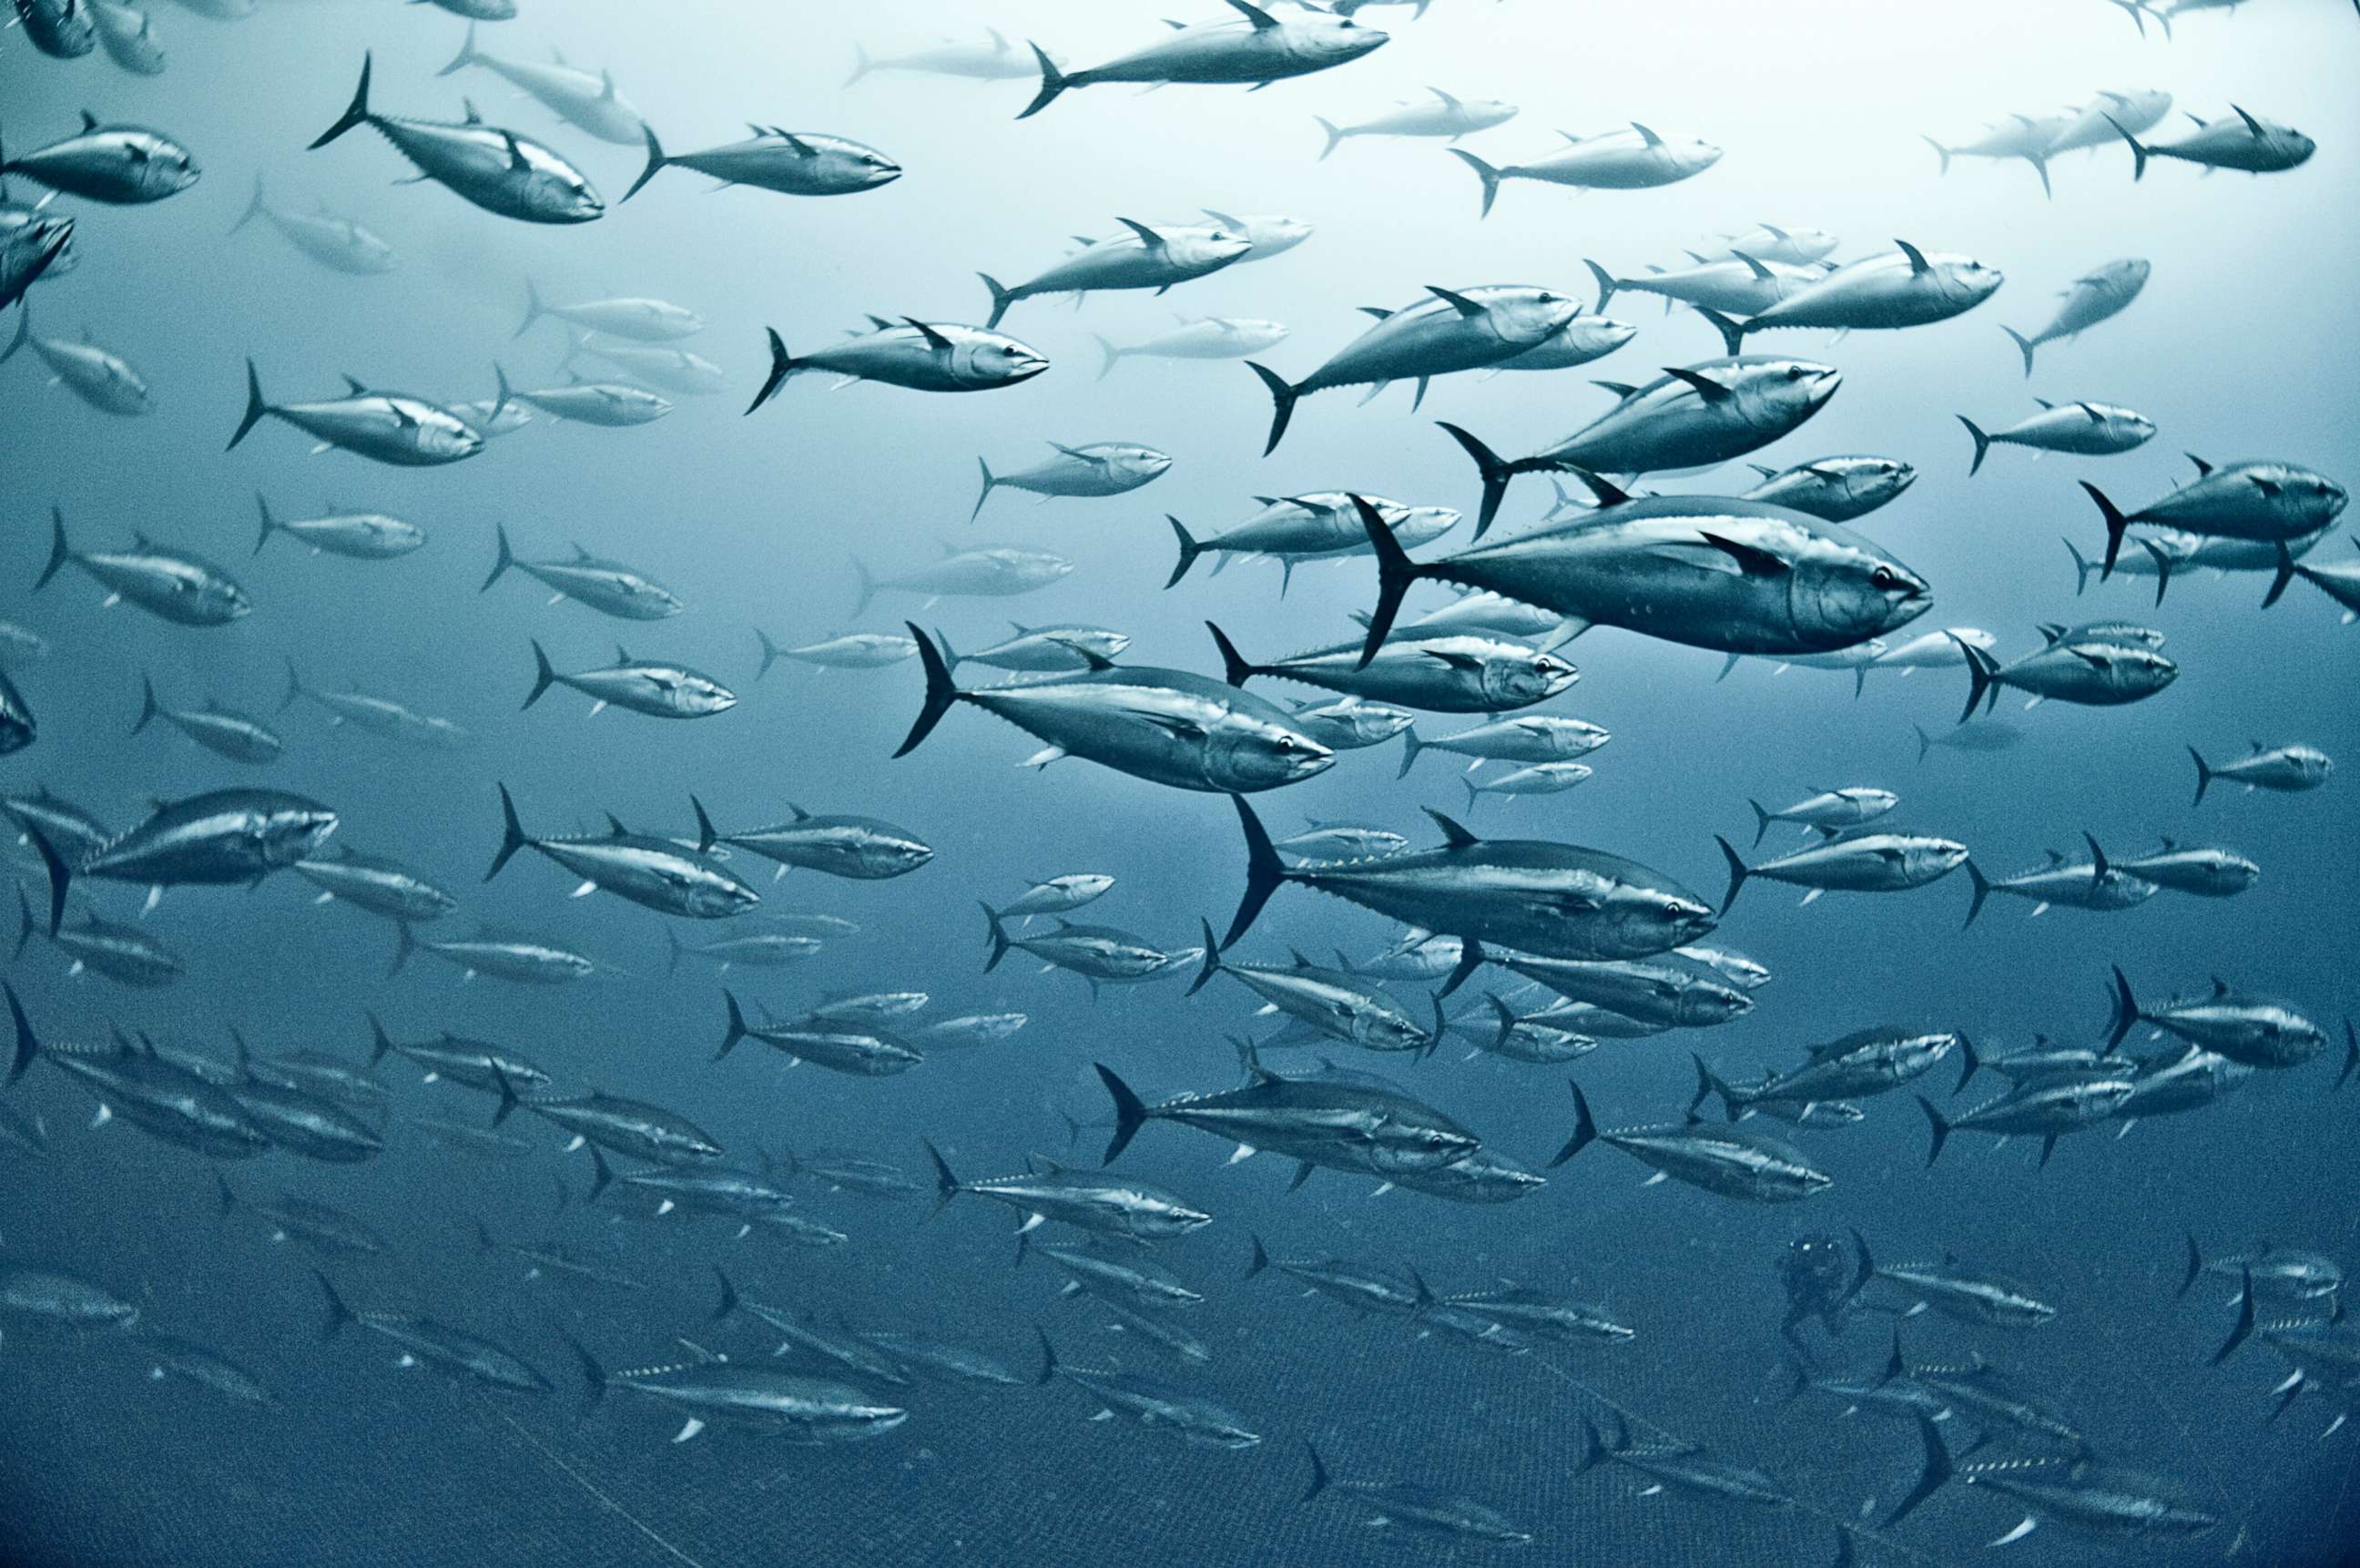 PHOTO: In this undated file photo, a large group of yellowfin tuna is shown in the waters off Vibo Valentia, Calabria, Italy.